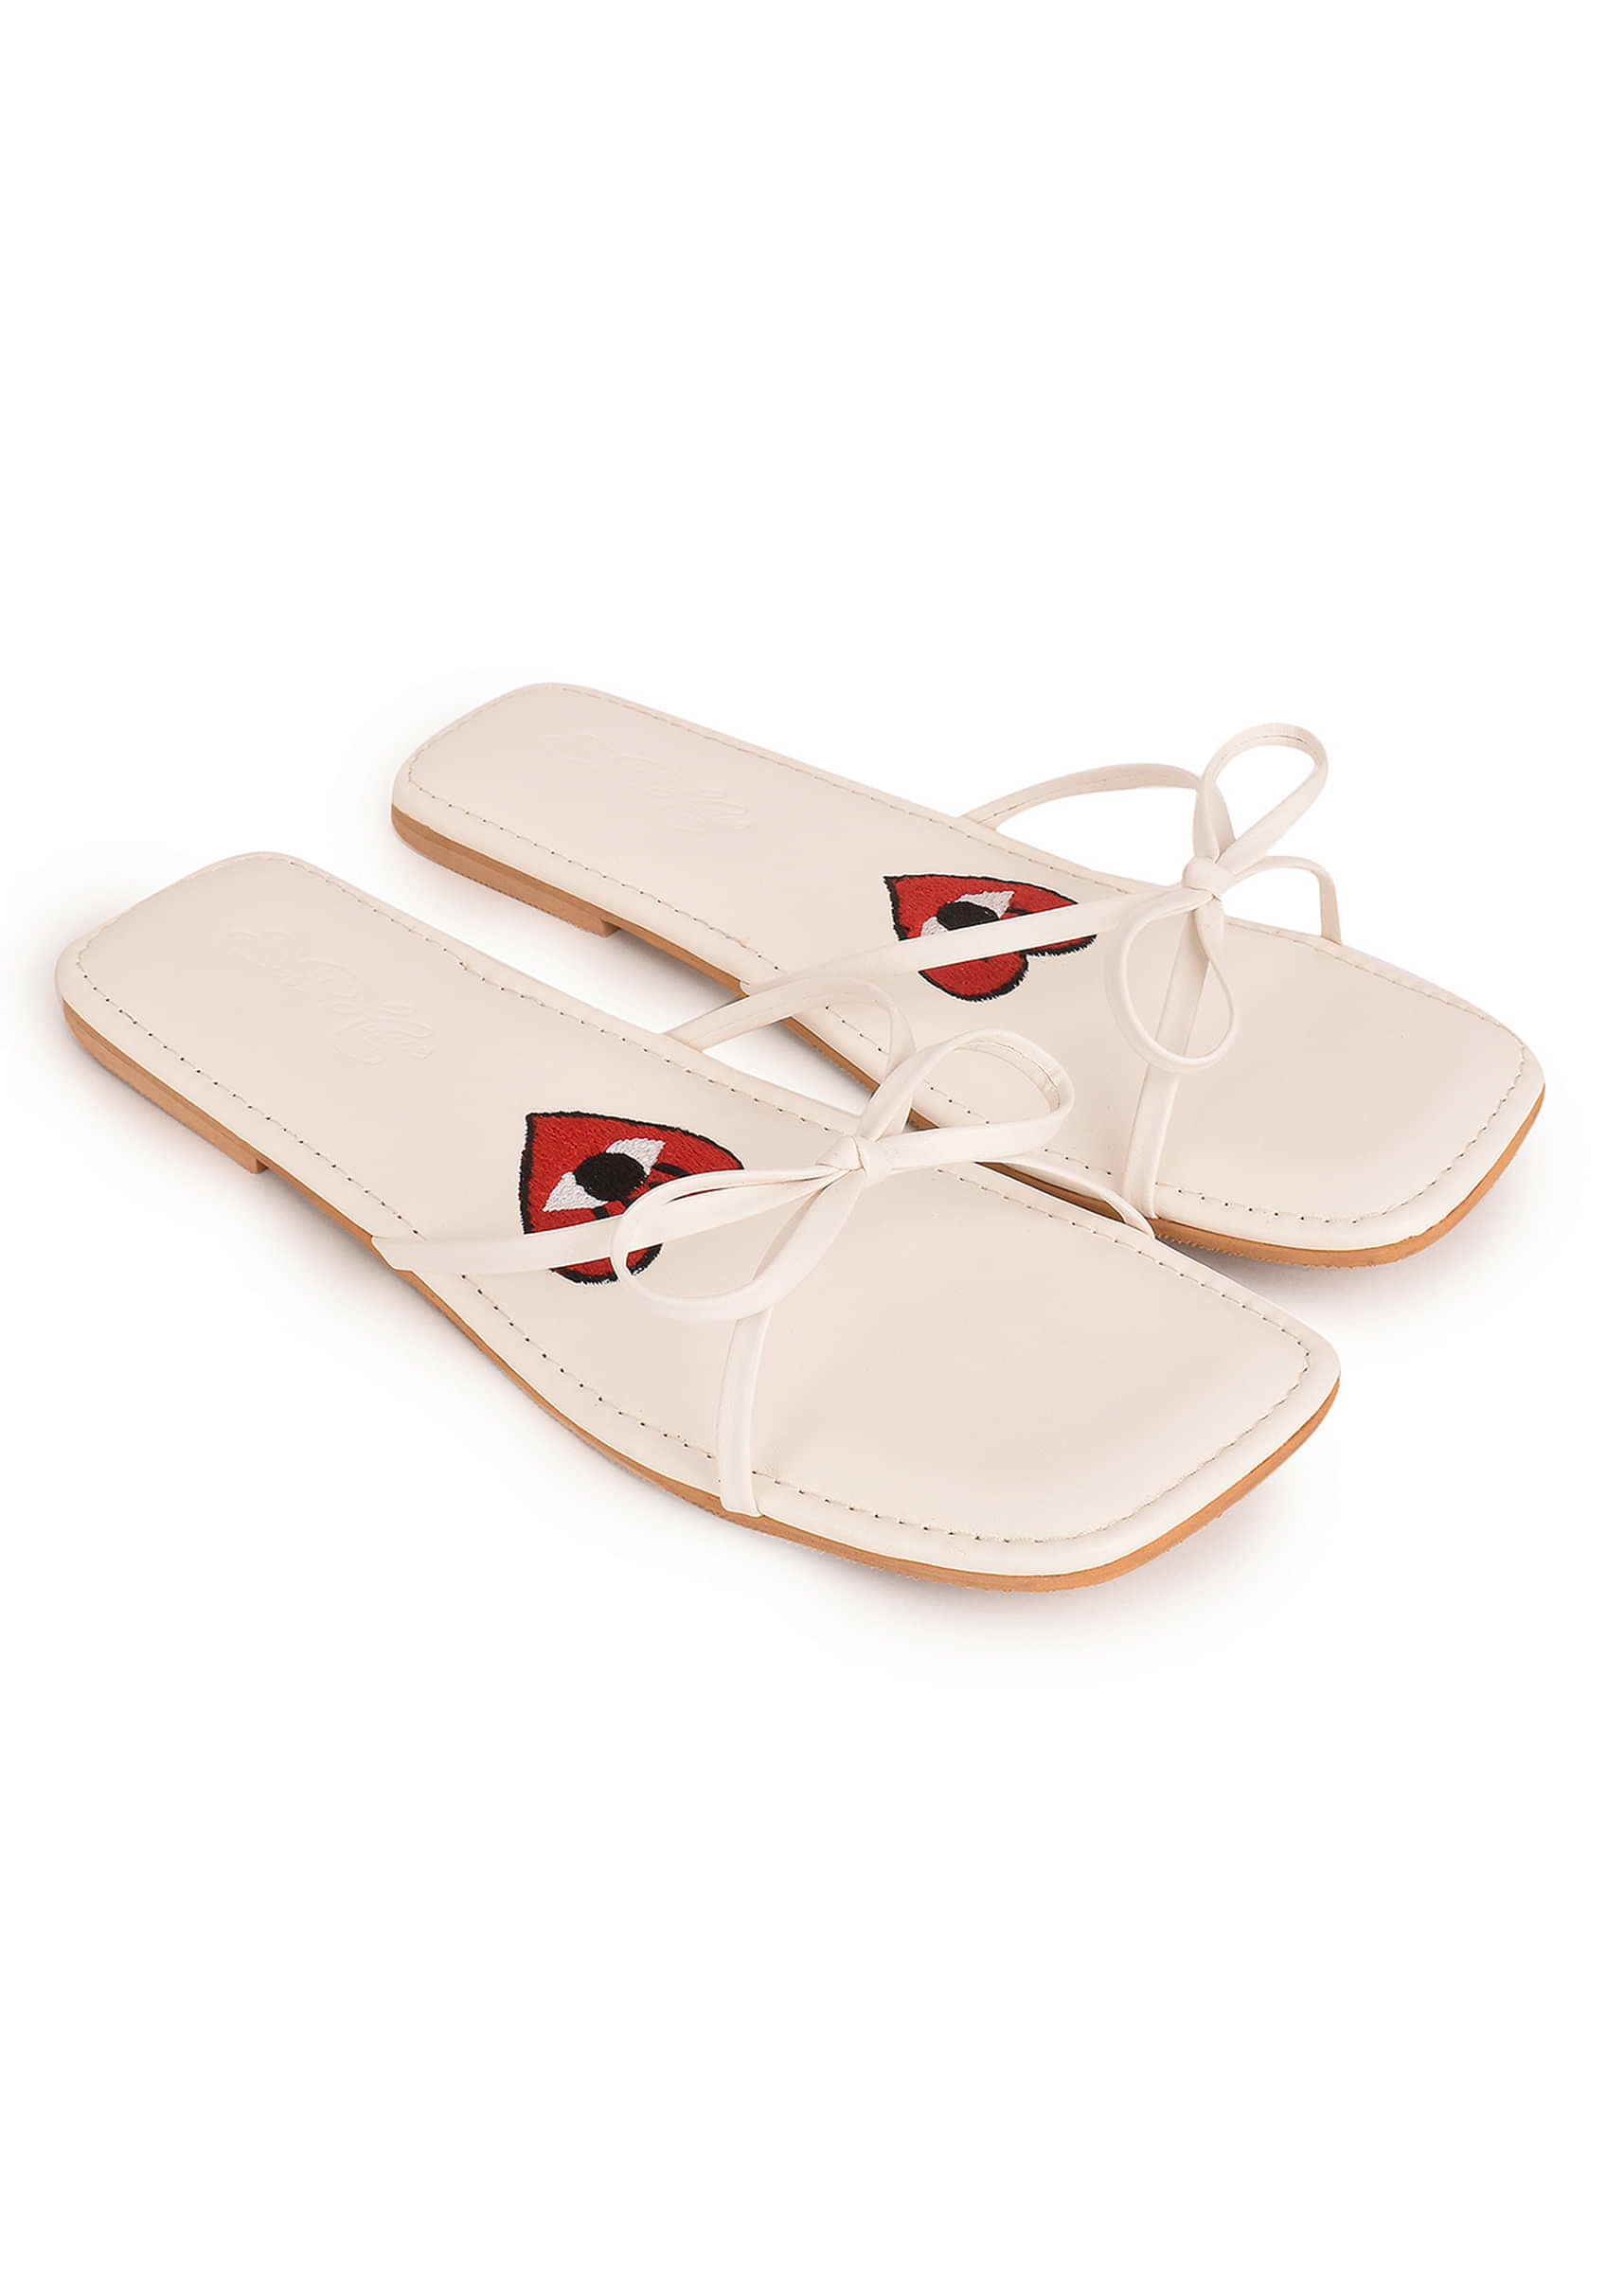 White Flats With Bow Detailing And Heart Motif By Sole House